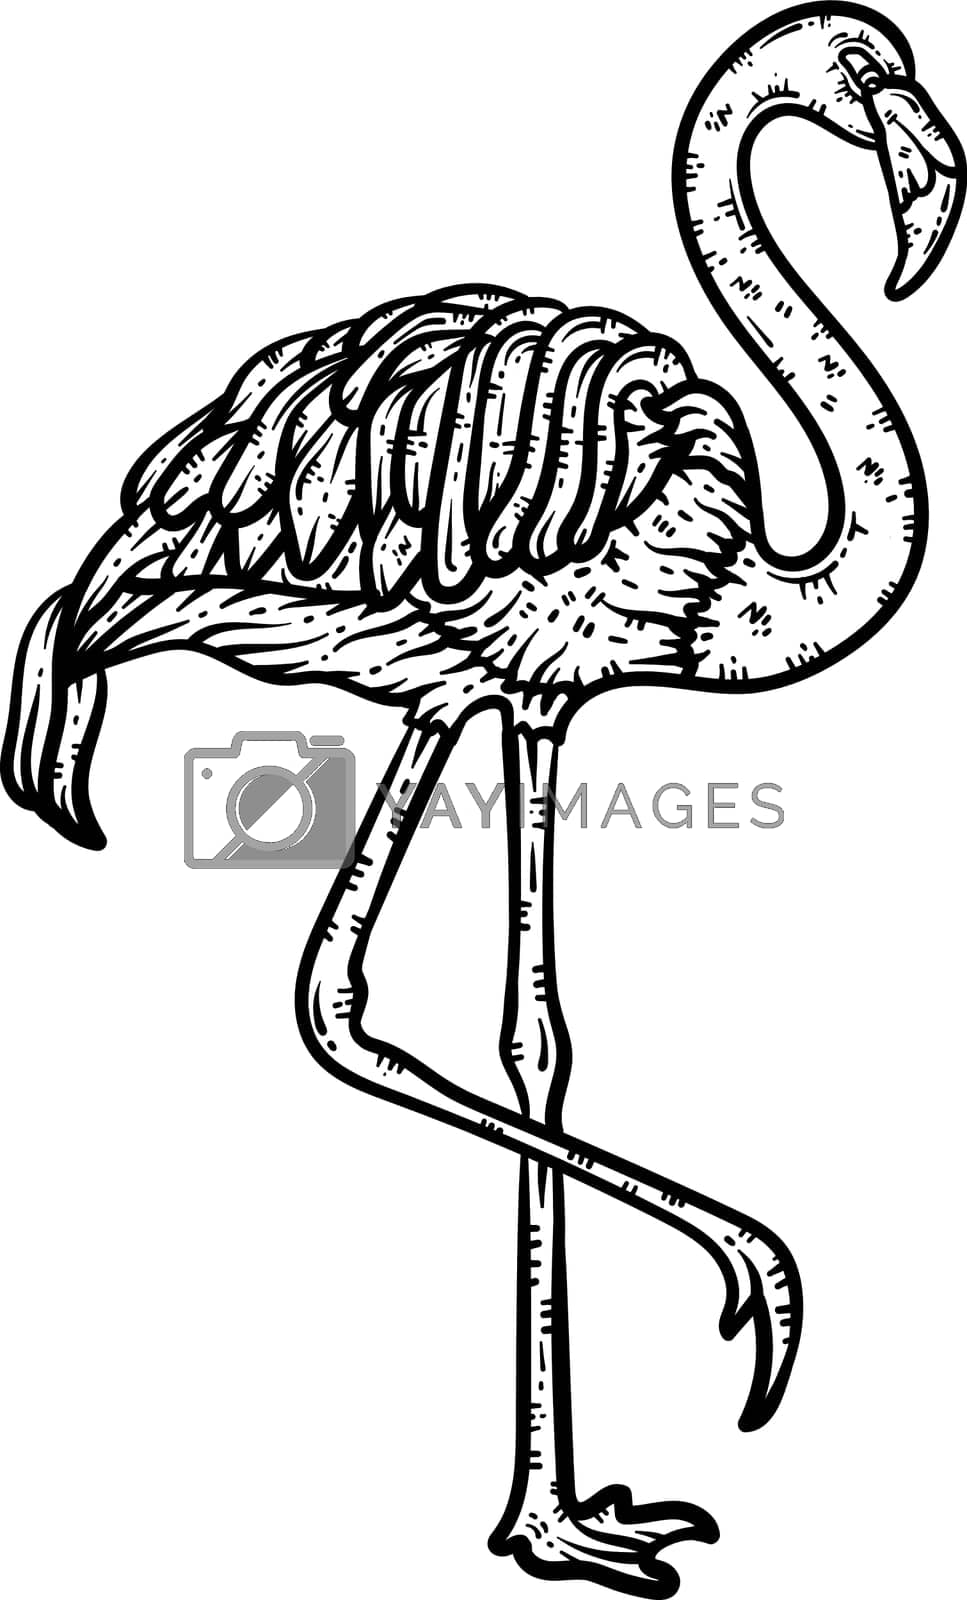 Royalty free image of Flamingo Animal Coloring Page for Adults by abbydesign